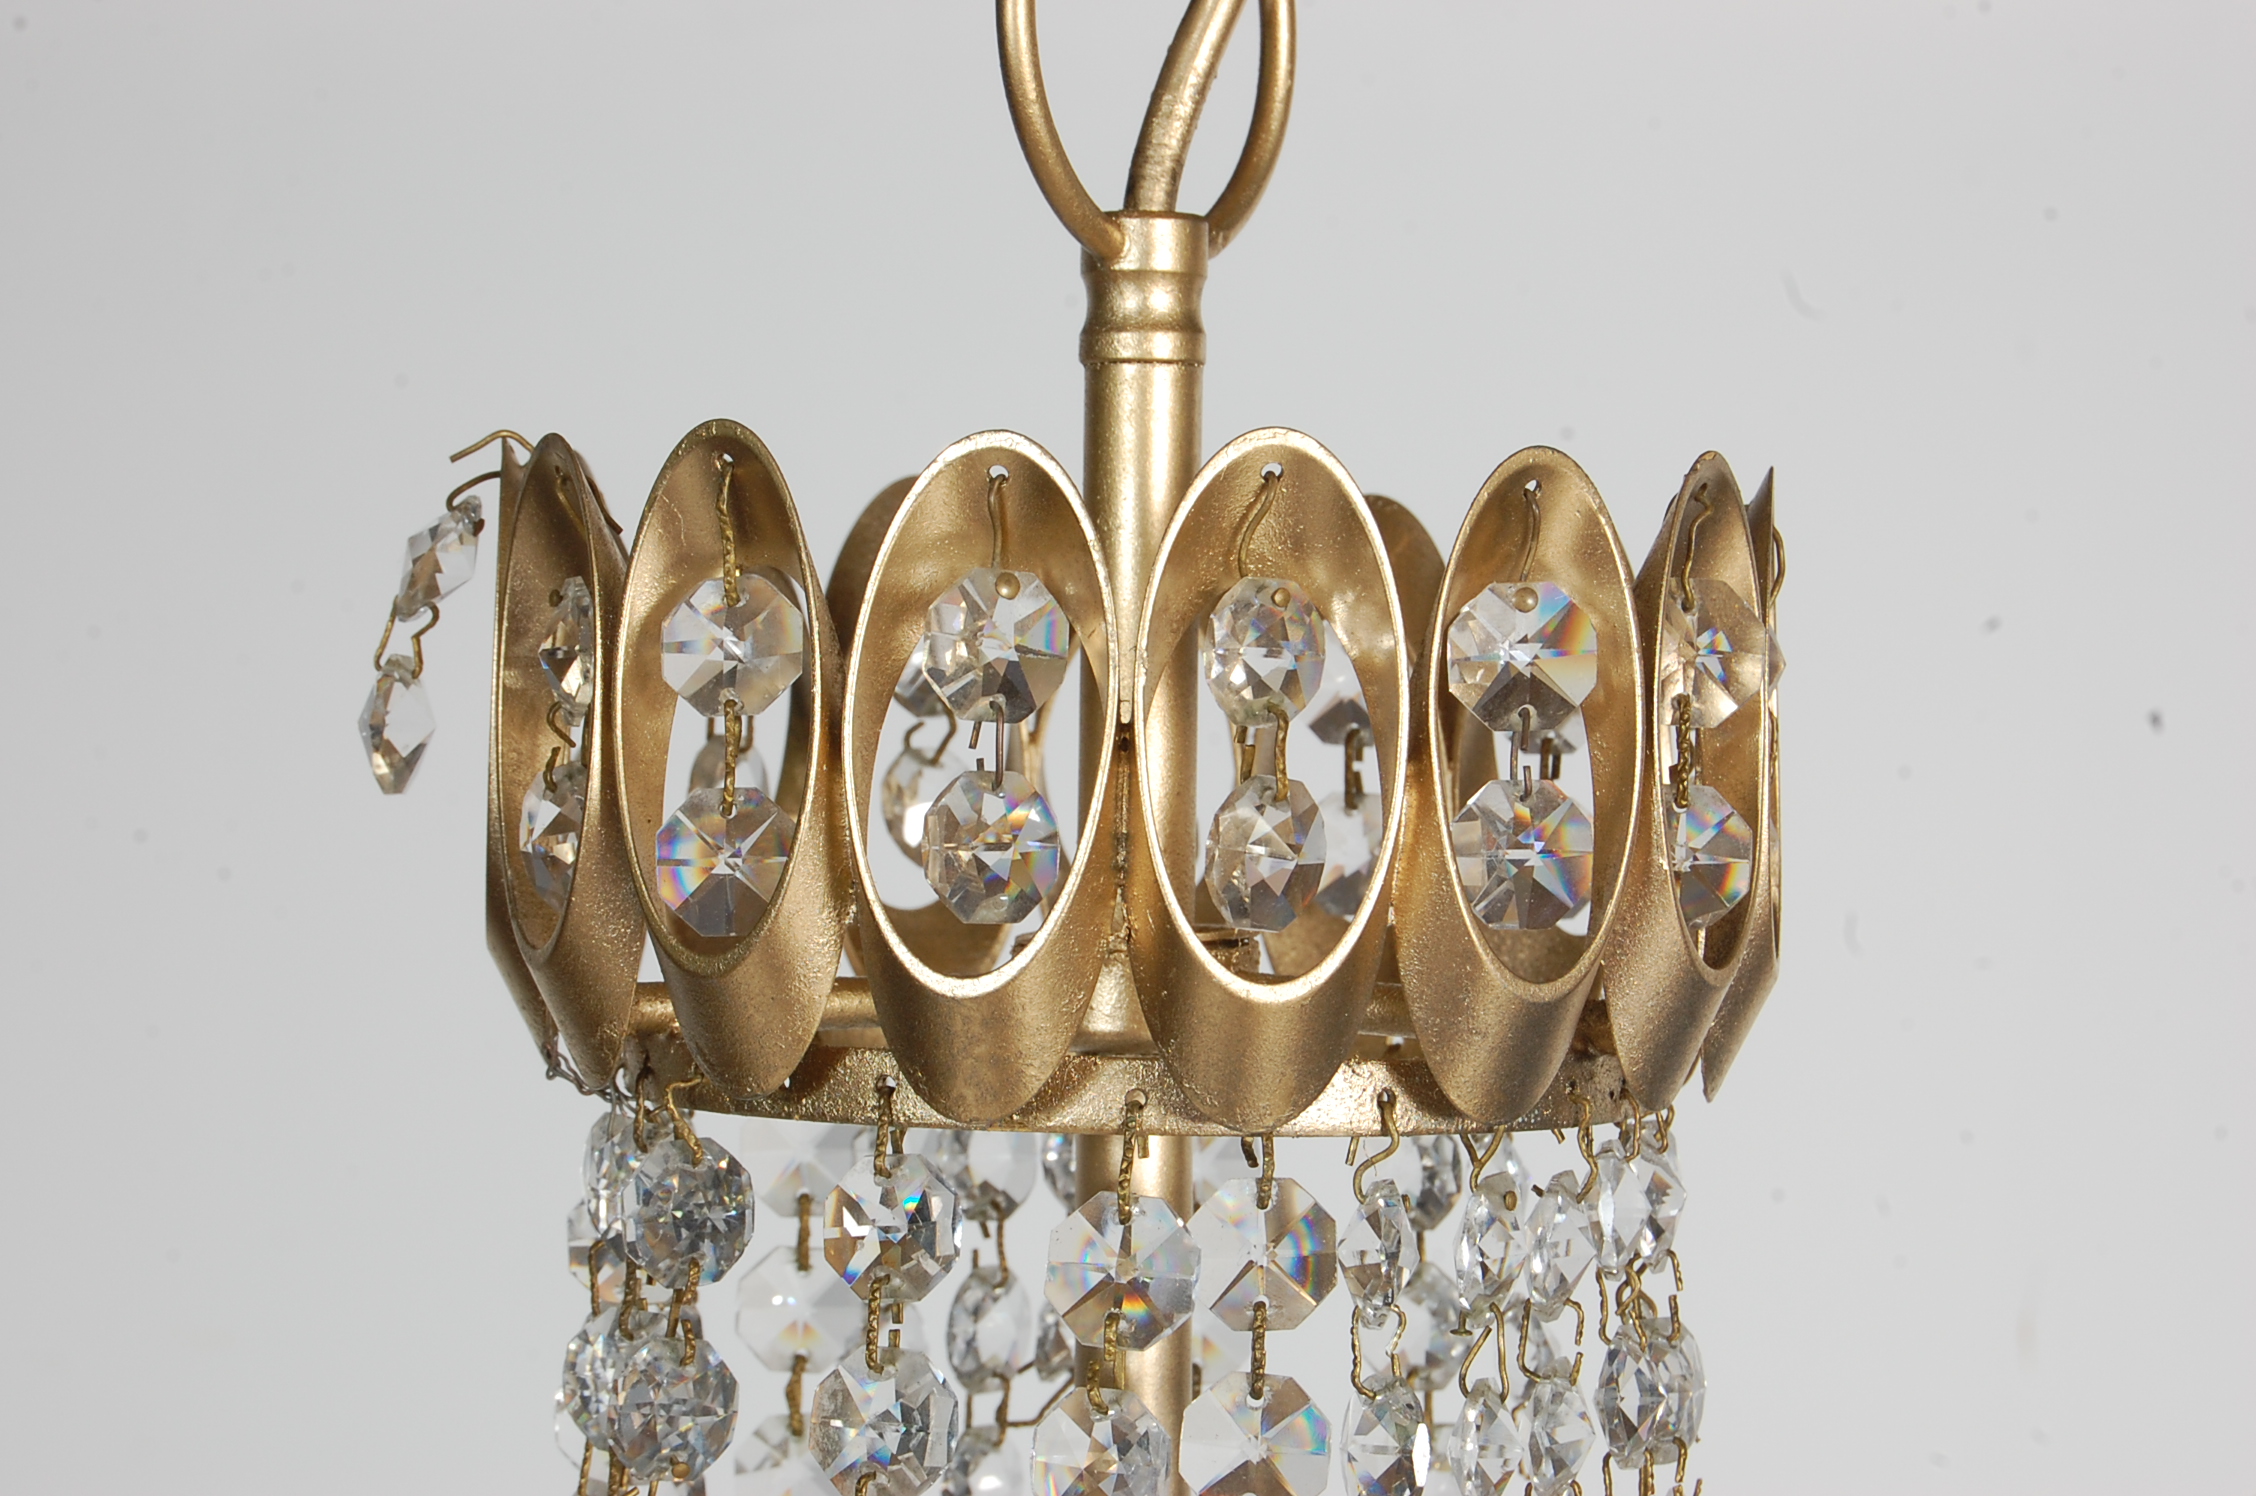 ANTIQUE VICTORIAN STYLE BRASS AND GLASS CHANDELIER - Image 3 of 5